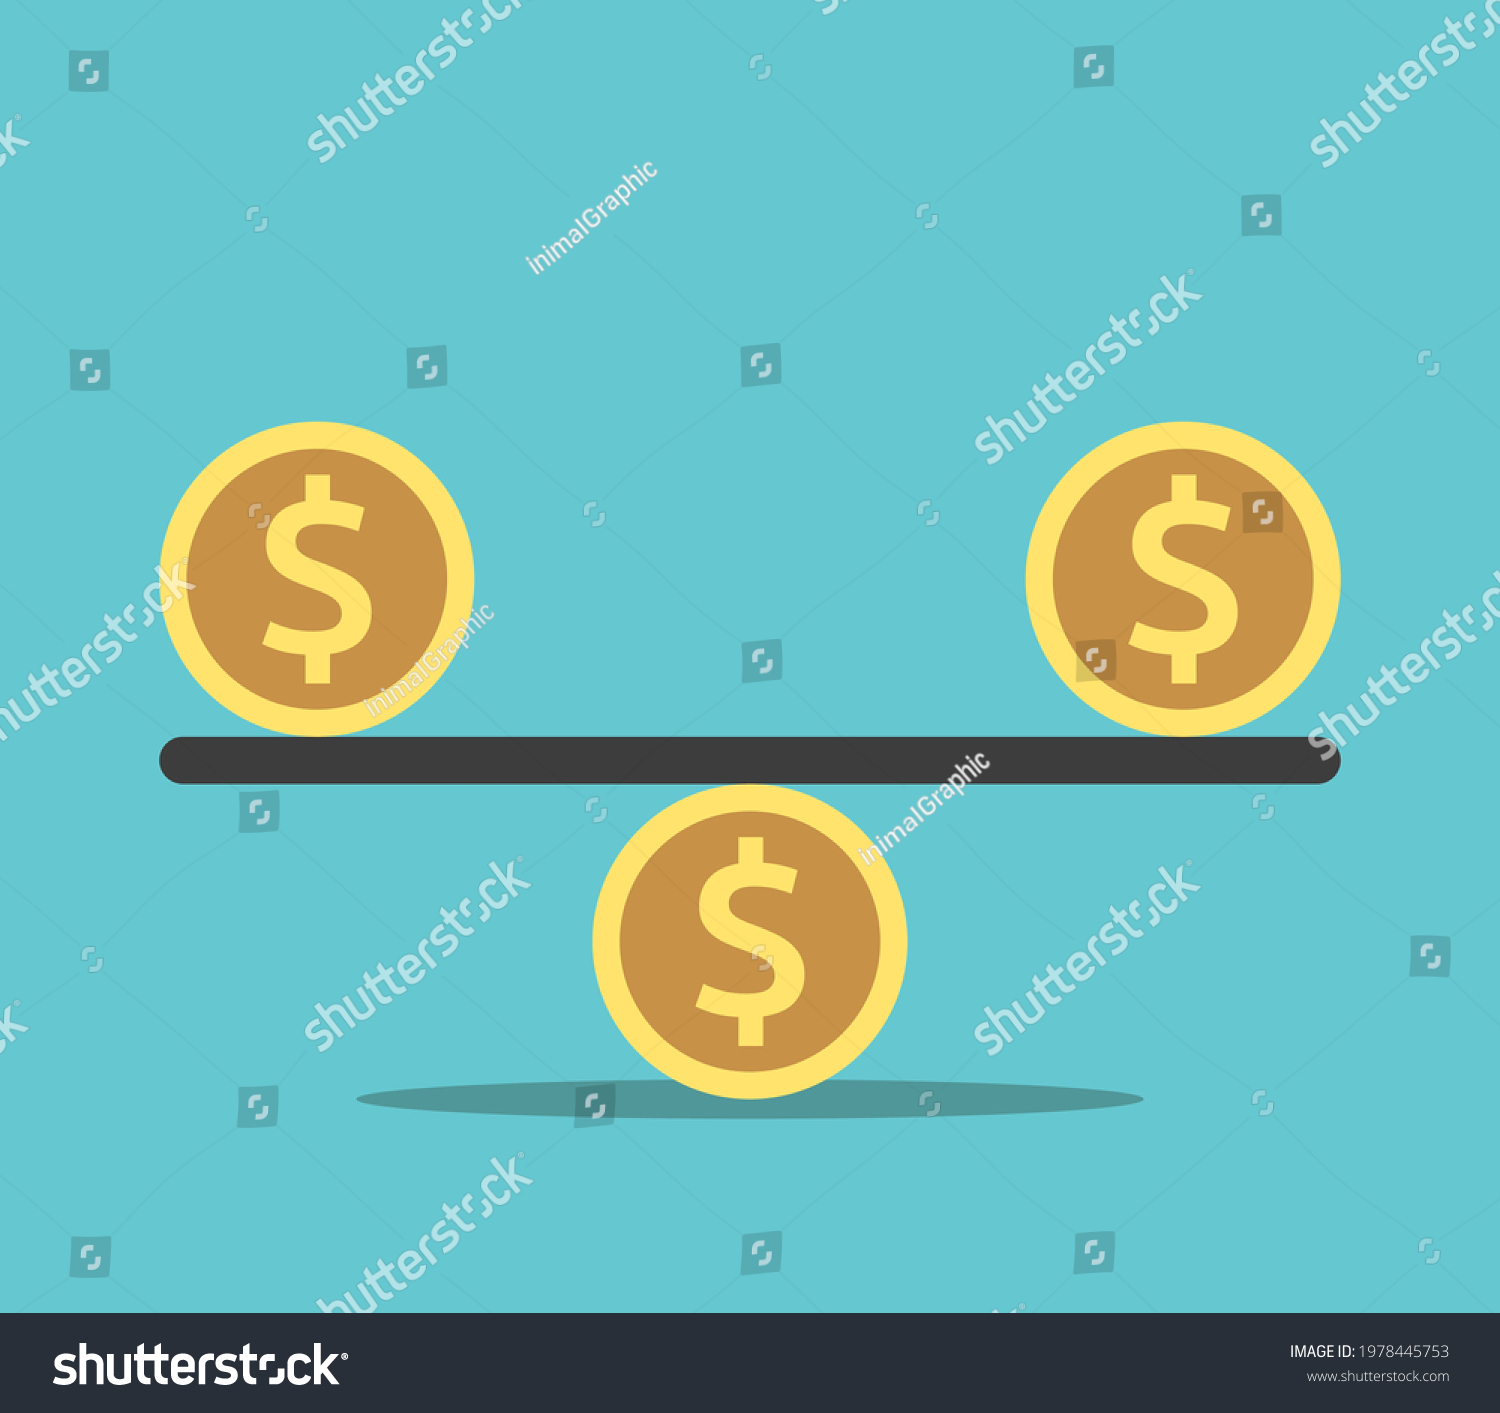 SVG of Two dollar coins on seesaw weight scale balanced on another coin. Greed, injustice, corruption, values and budget concept. Flat design. EPS 8 vector illustration, no transparency, no gradients svg